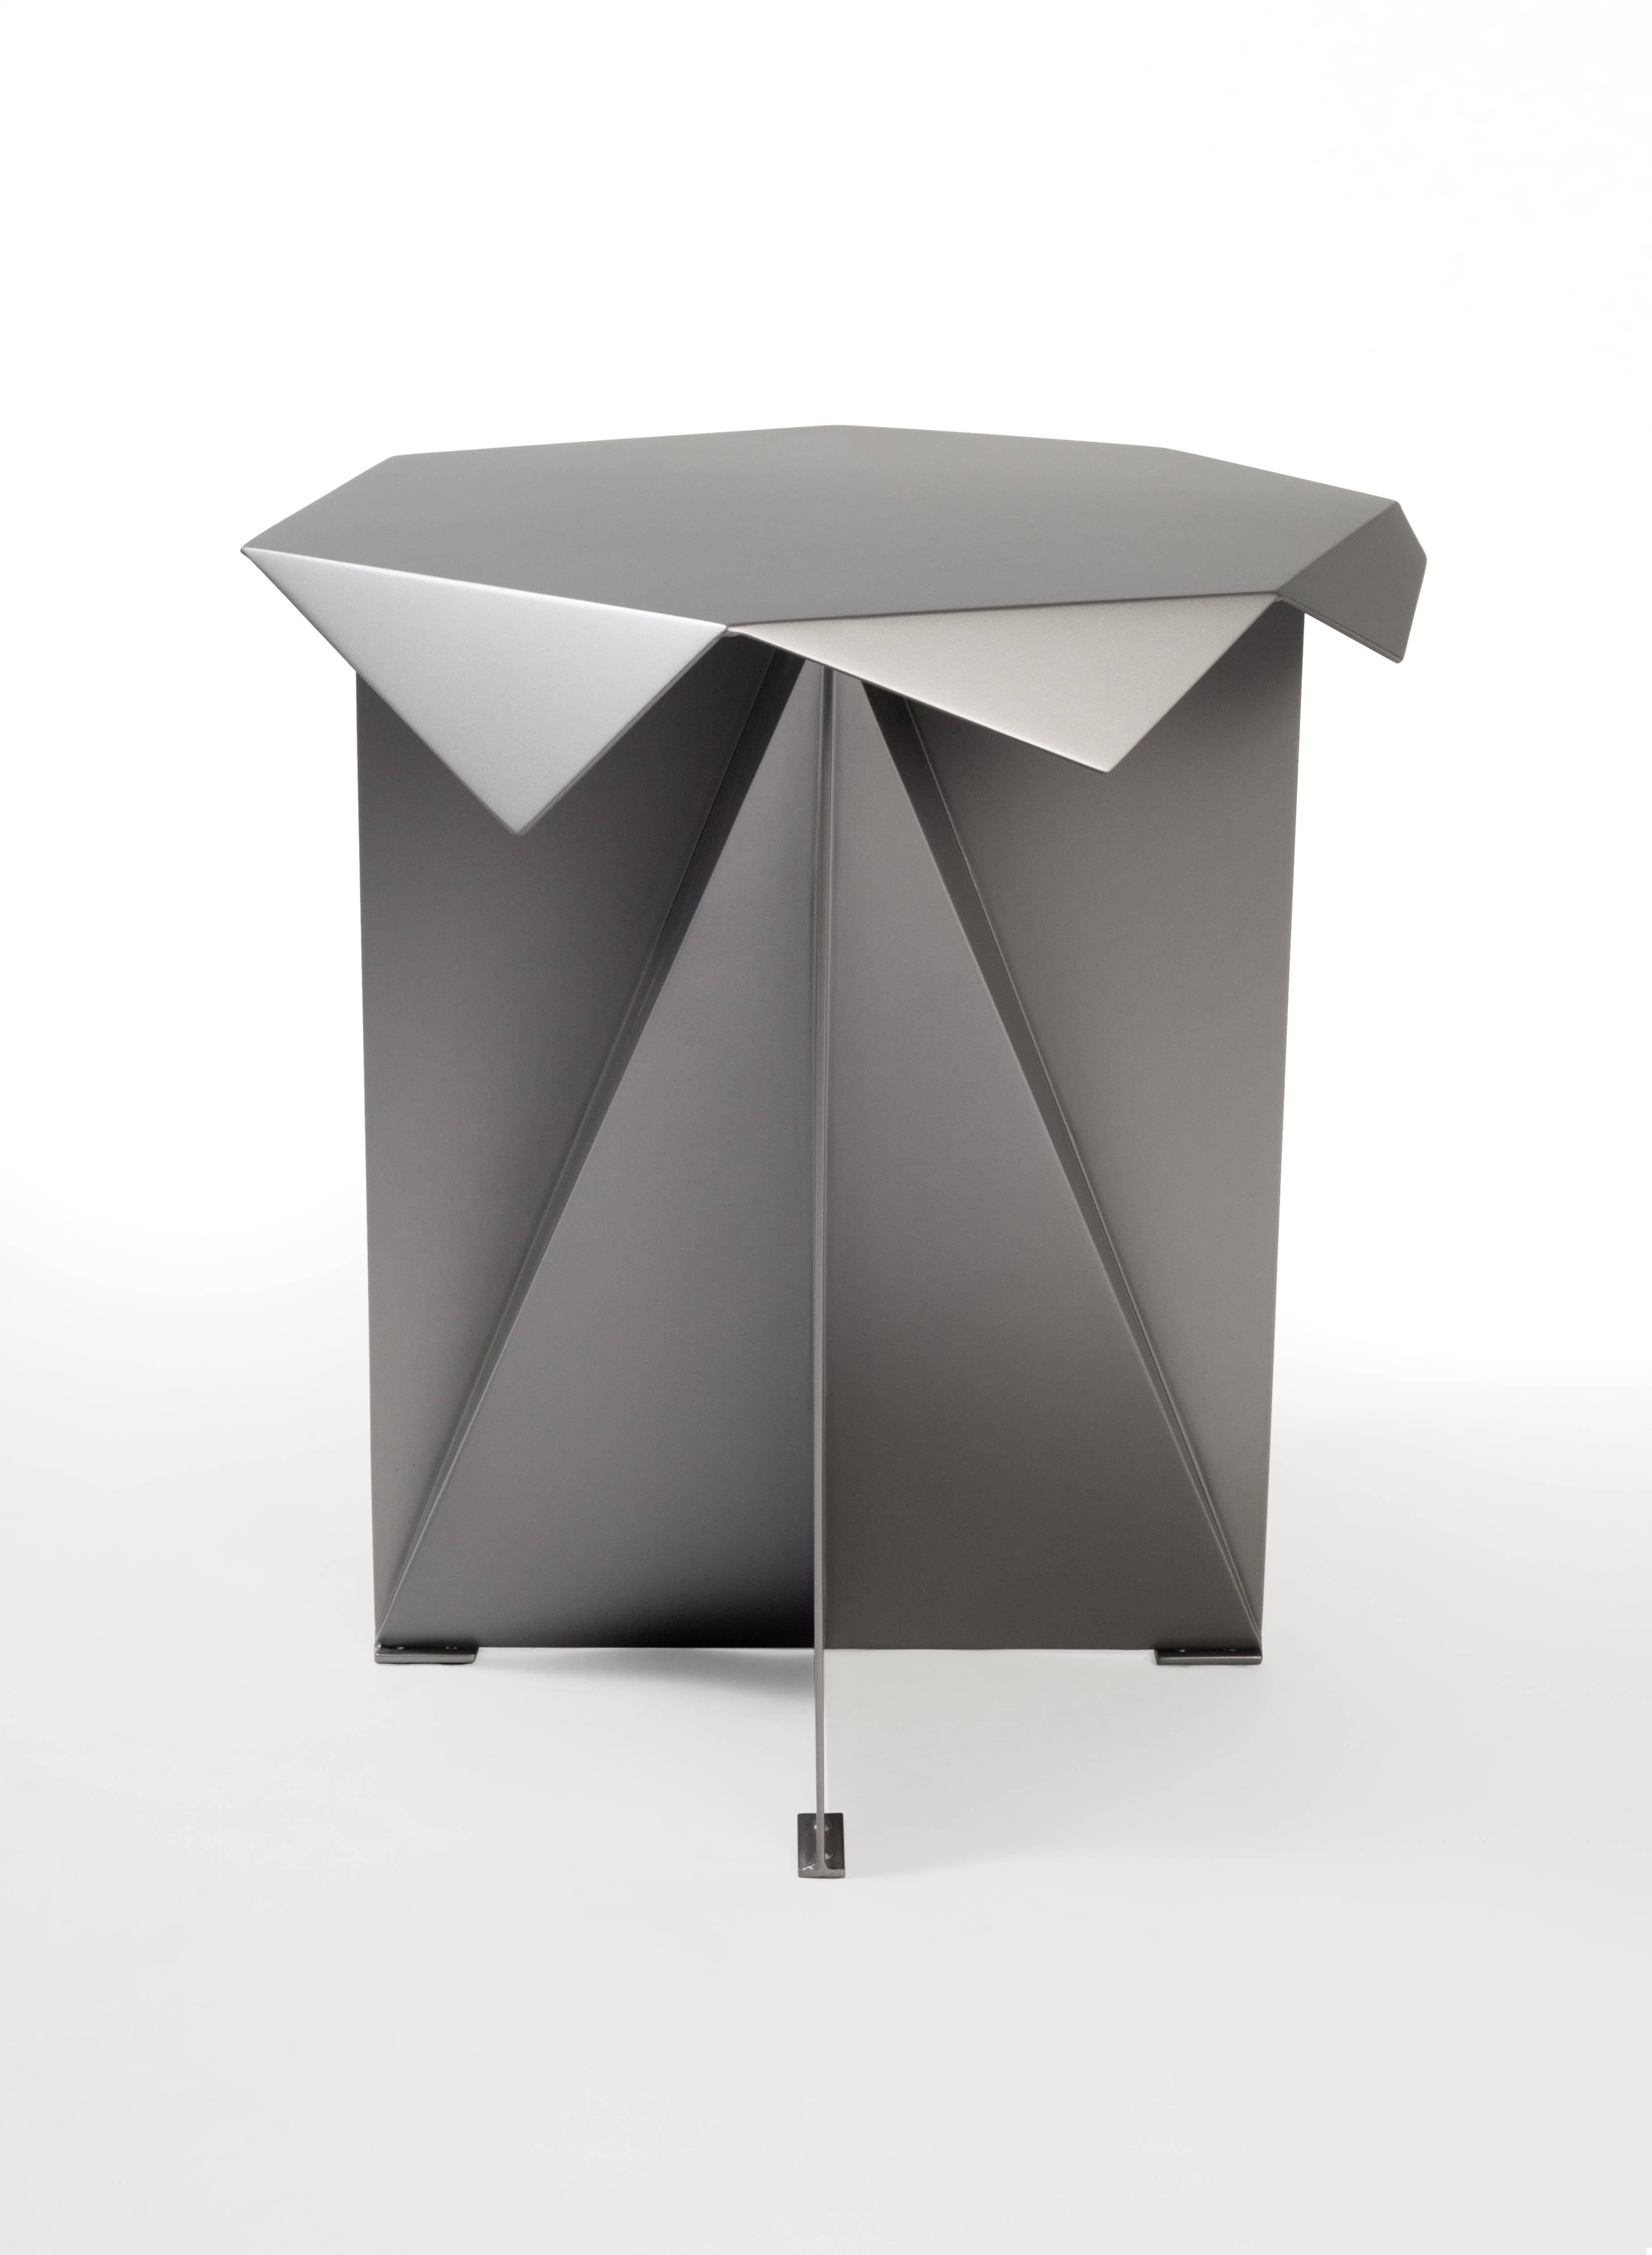 A very sculptural powder-coated steel table in high end quality.

